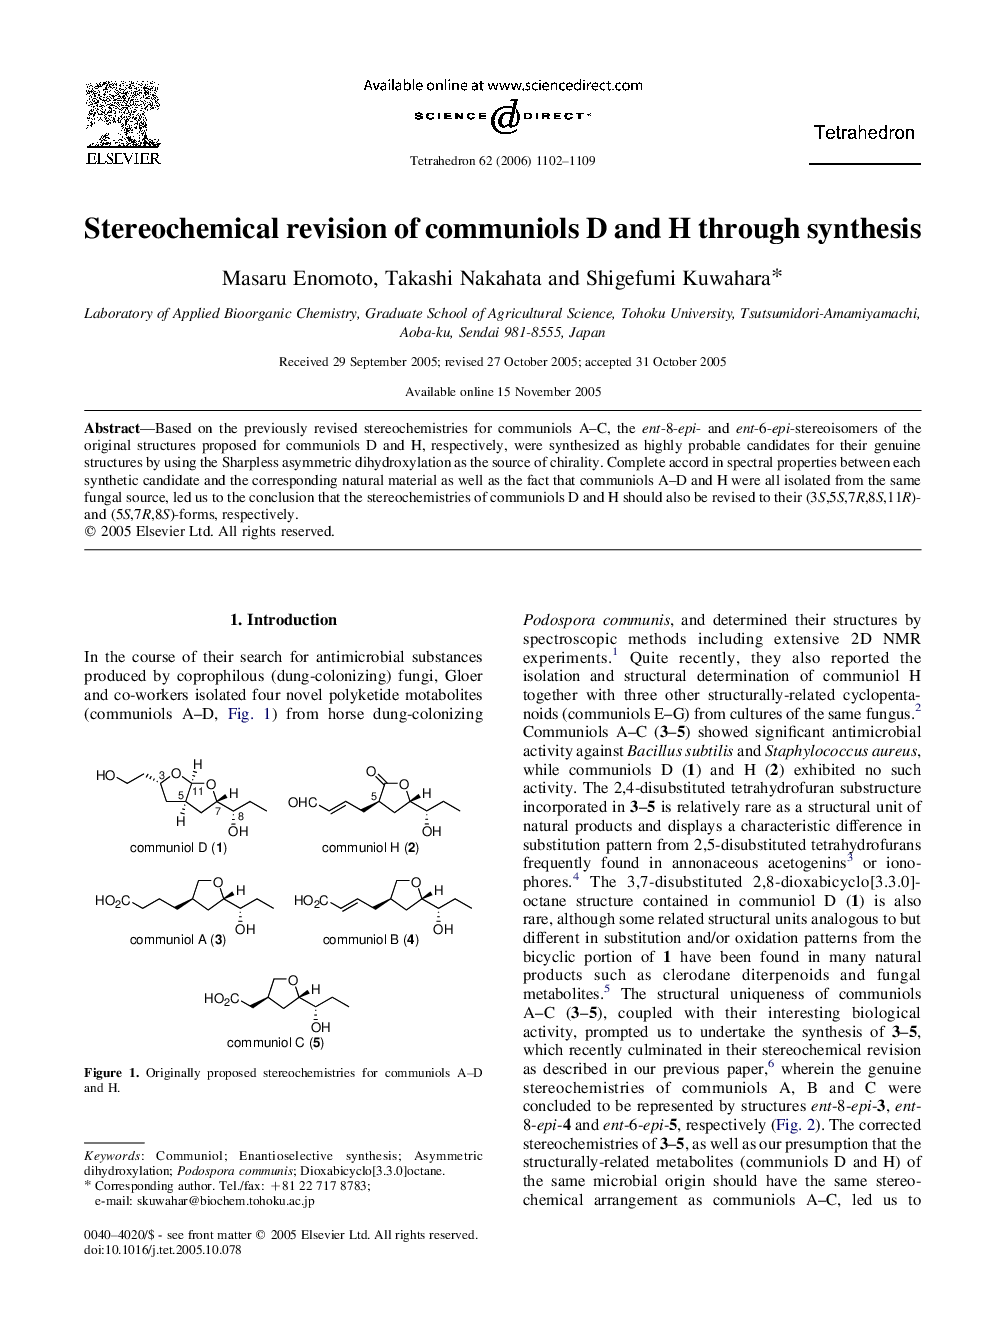 Stereochemical revision of communiols D and H through synthesis